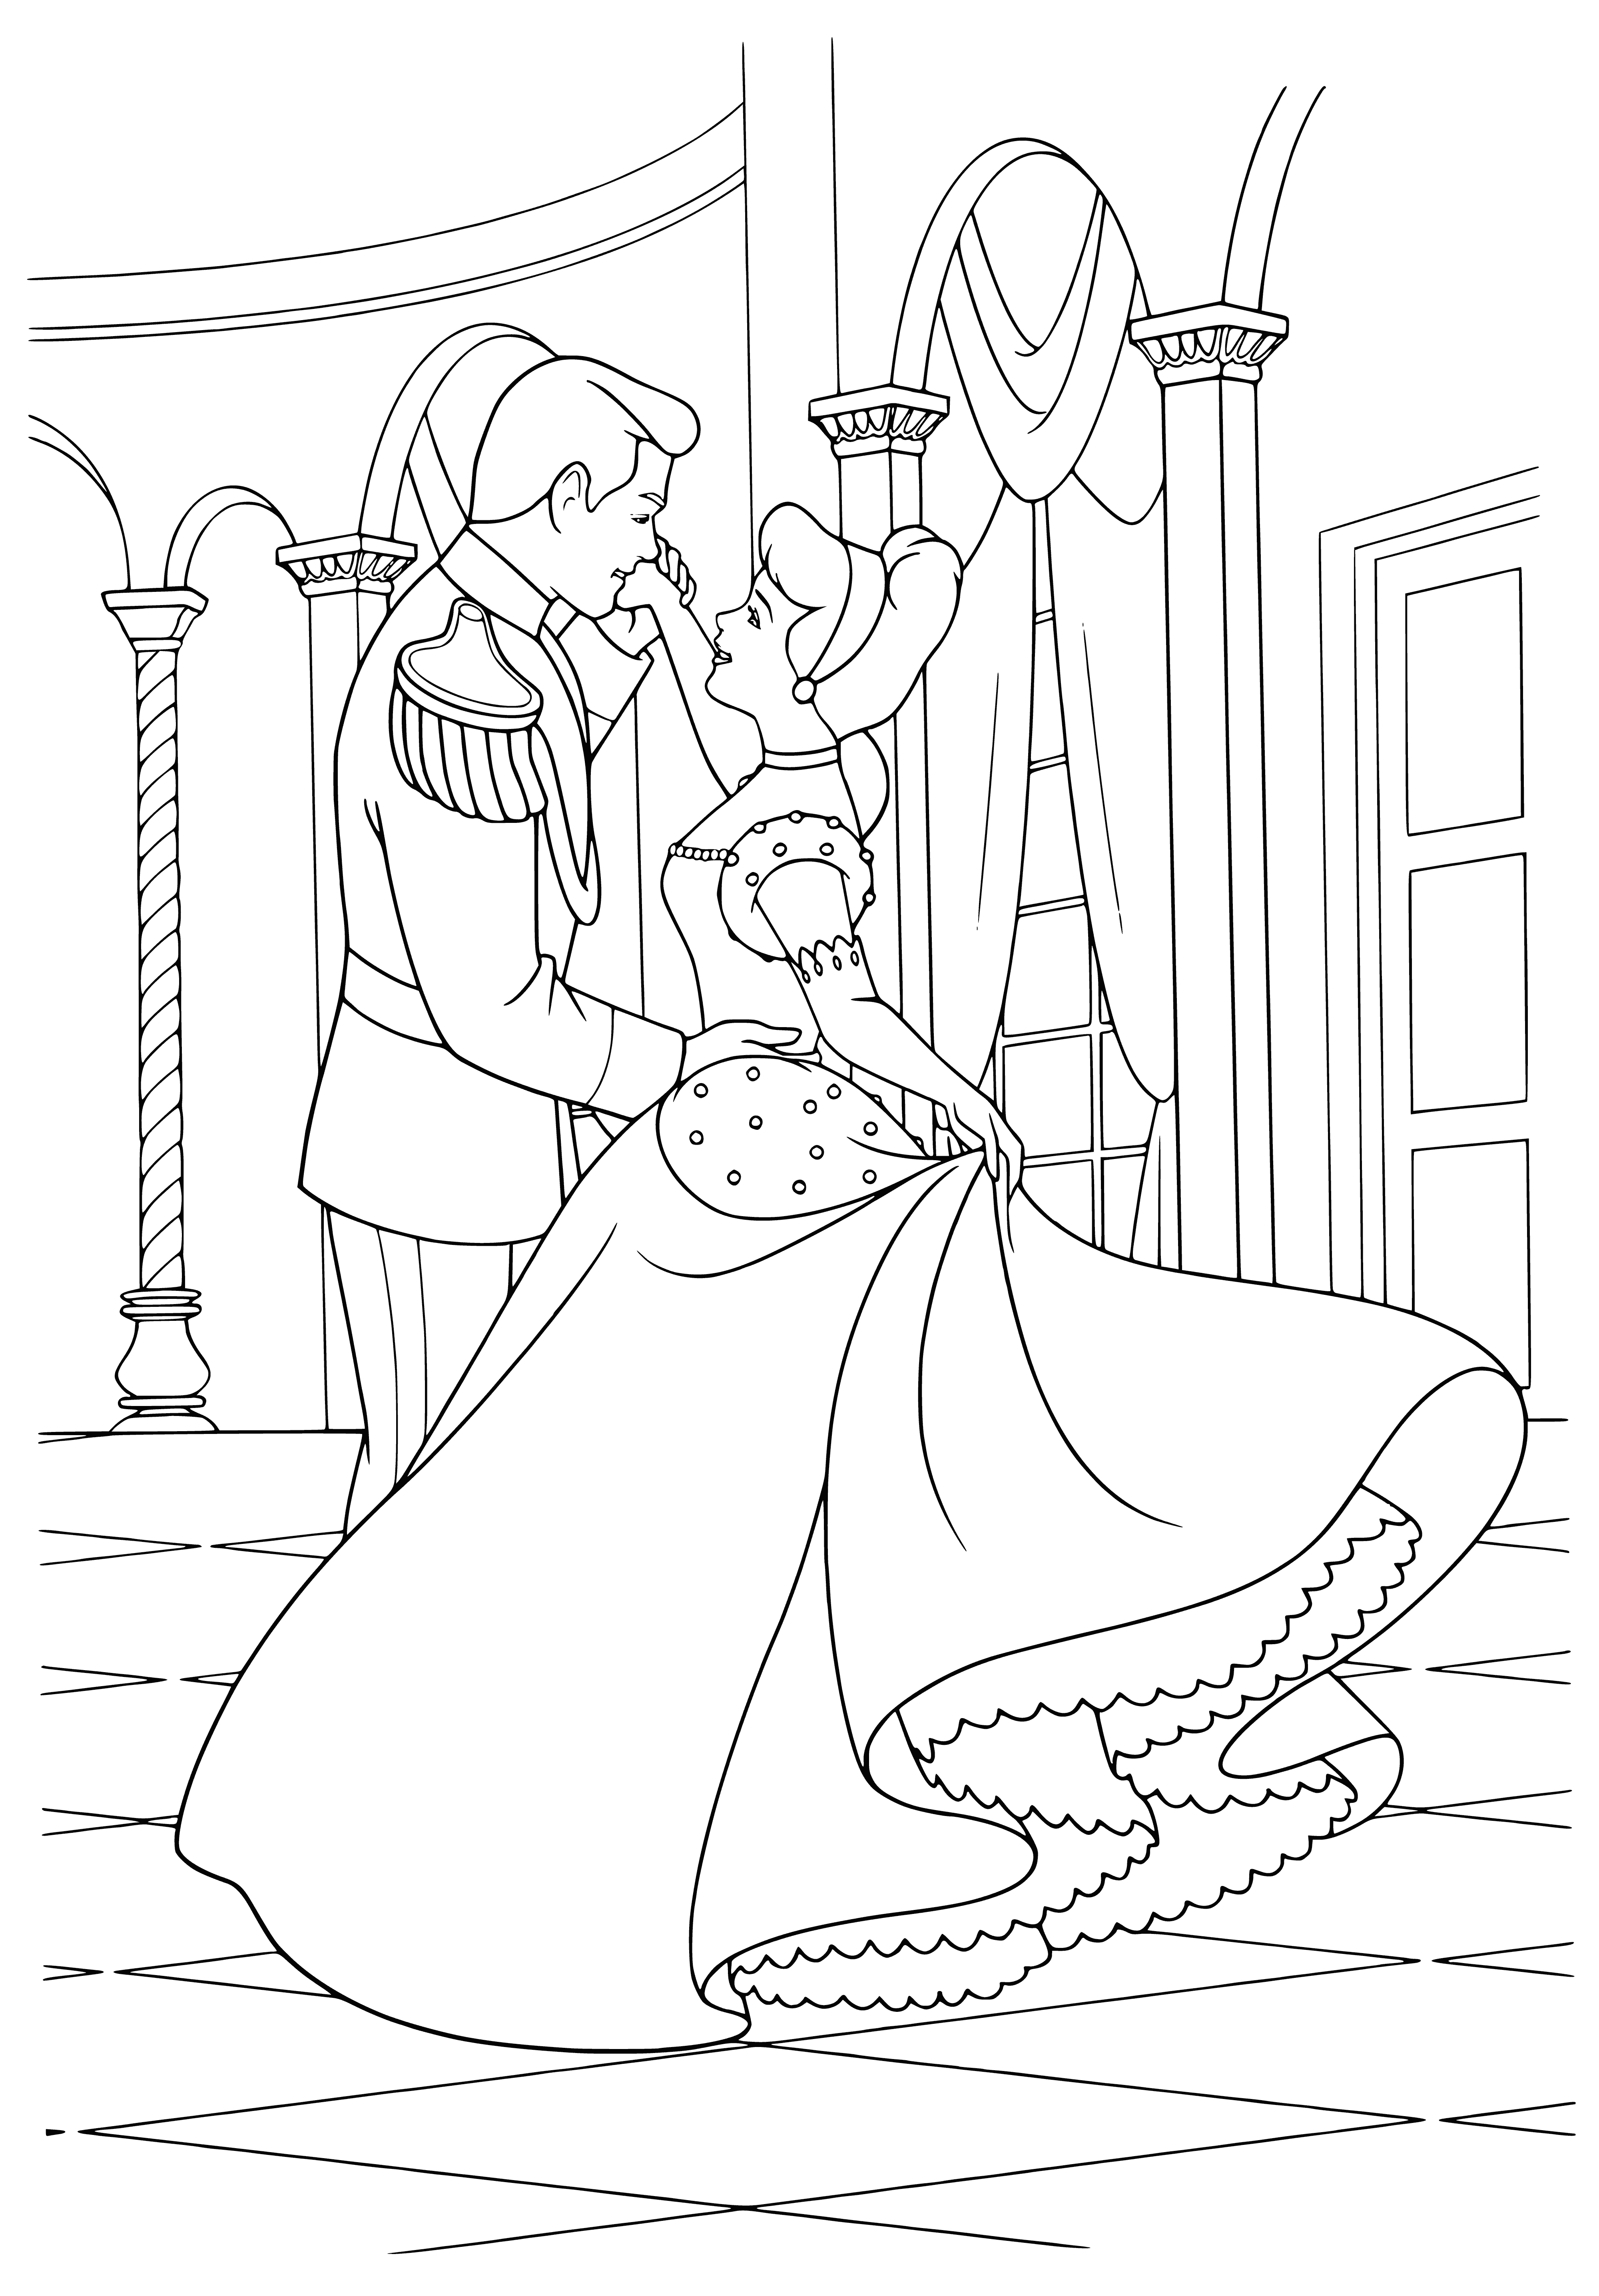 Cinderella dancing with the prince coloring page